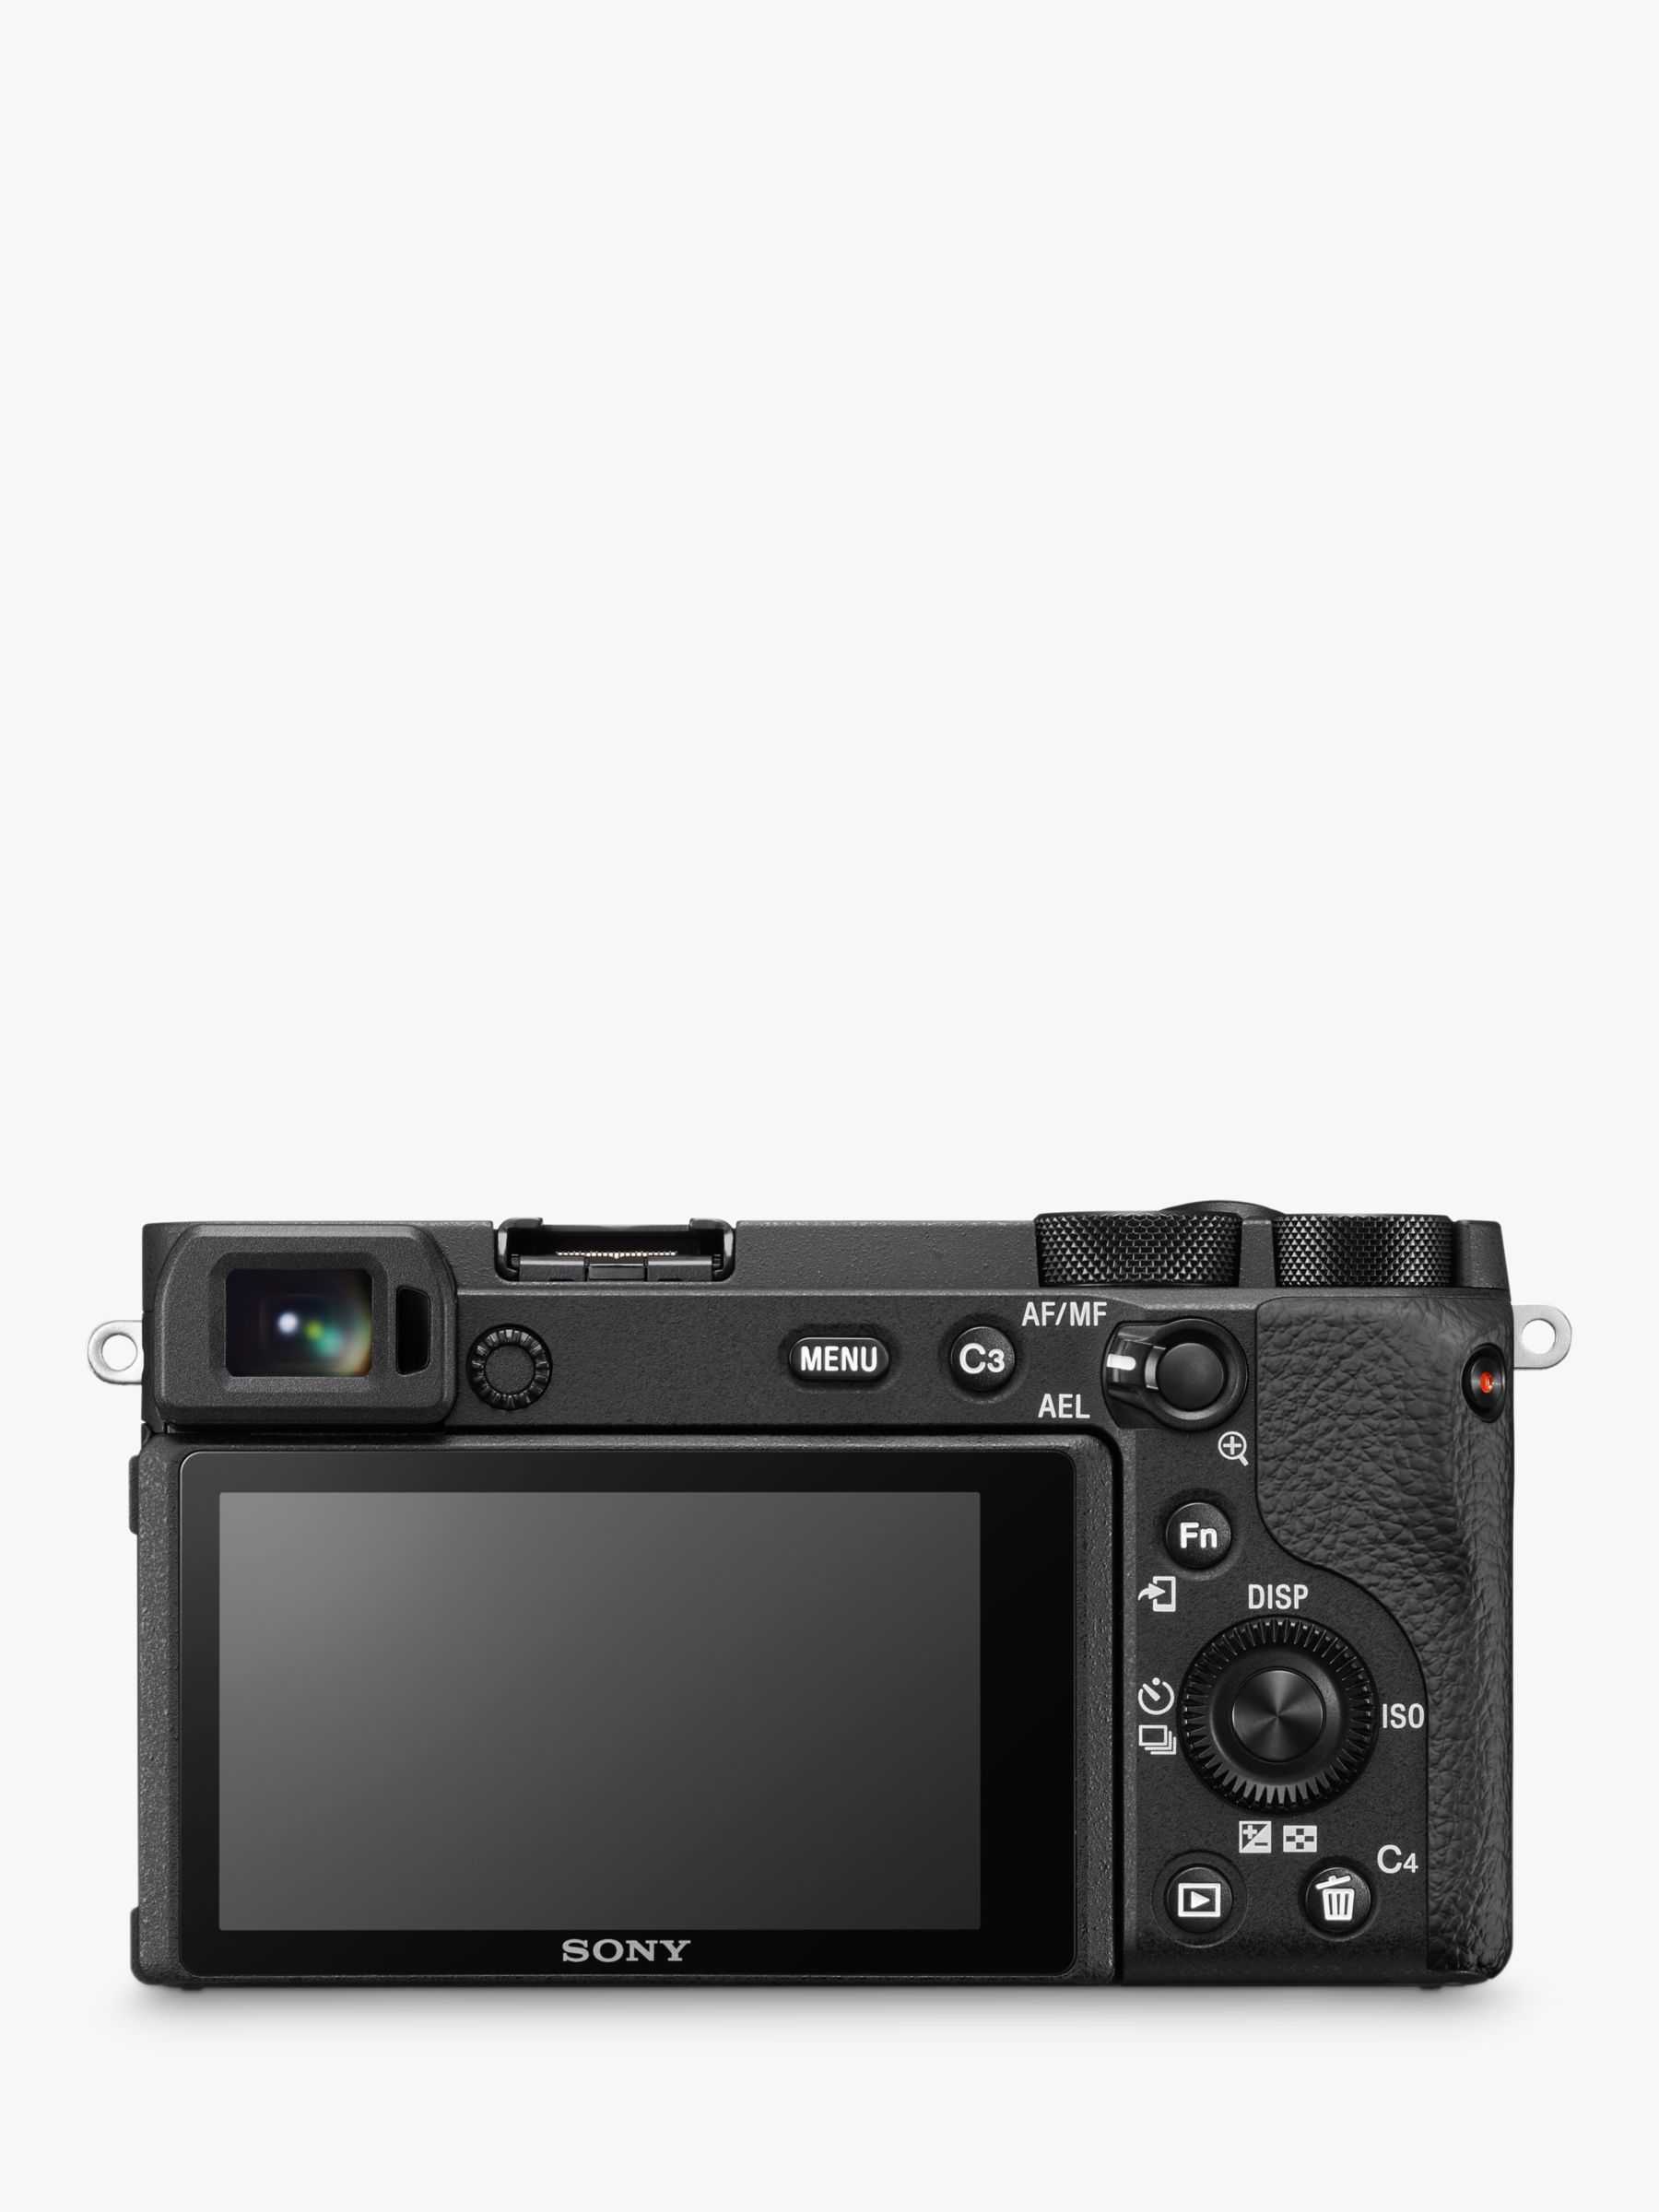  Sony a6600 Mirrorless Camera 4K APS-C ILCE-6600MB with  18-135mm F3.5-5.6 OSS Lens Kit and Deco Gear Case + Extra Battery + Flash +  Wide Angle & Telephoto Lens + Filter